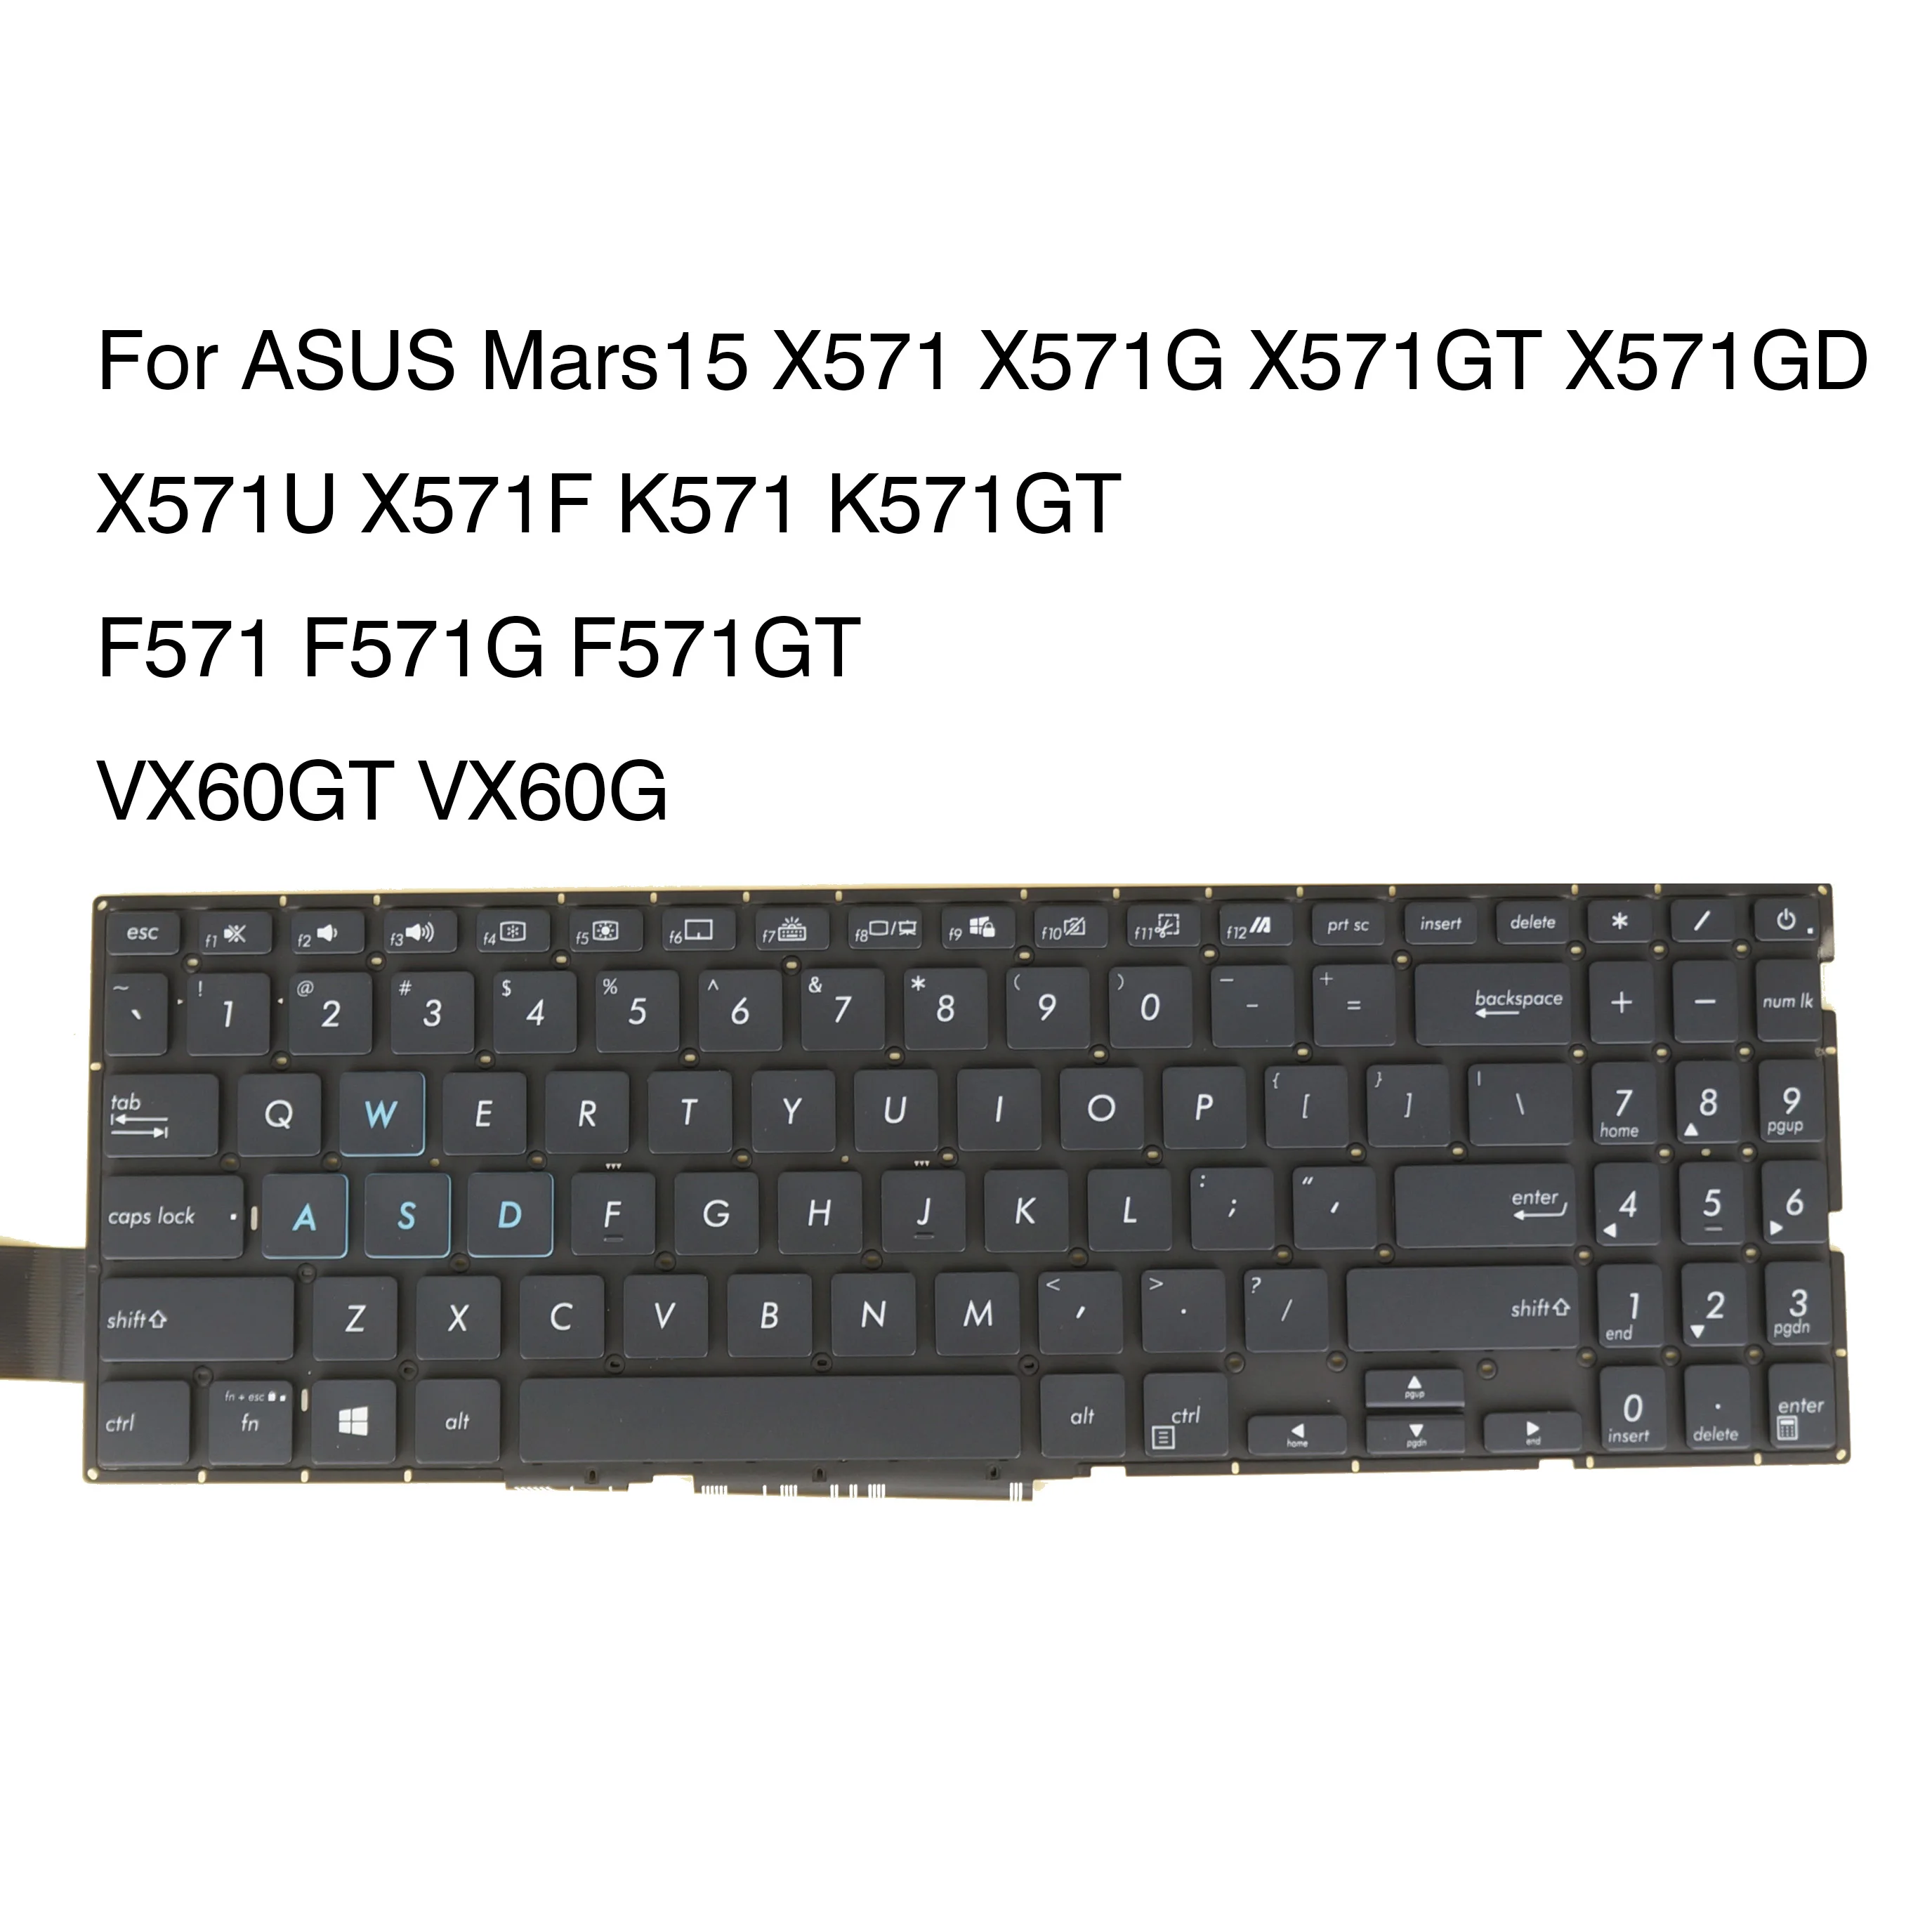 

US Laptop Keyboard For ASUS Mars 15 X571 X571G X571GD X571U X571F K571 F571 F571G F571GT VX60GT VX60G AEXKTU02010 Blue Backlit